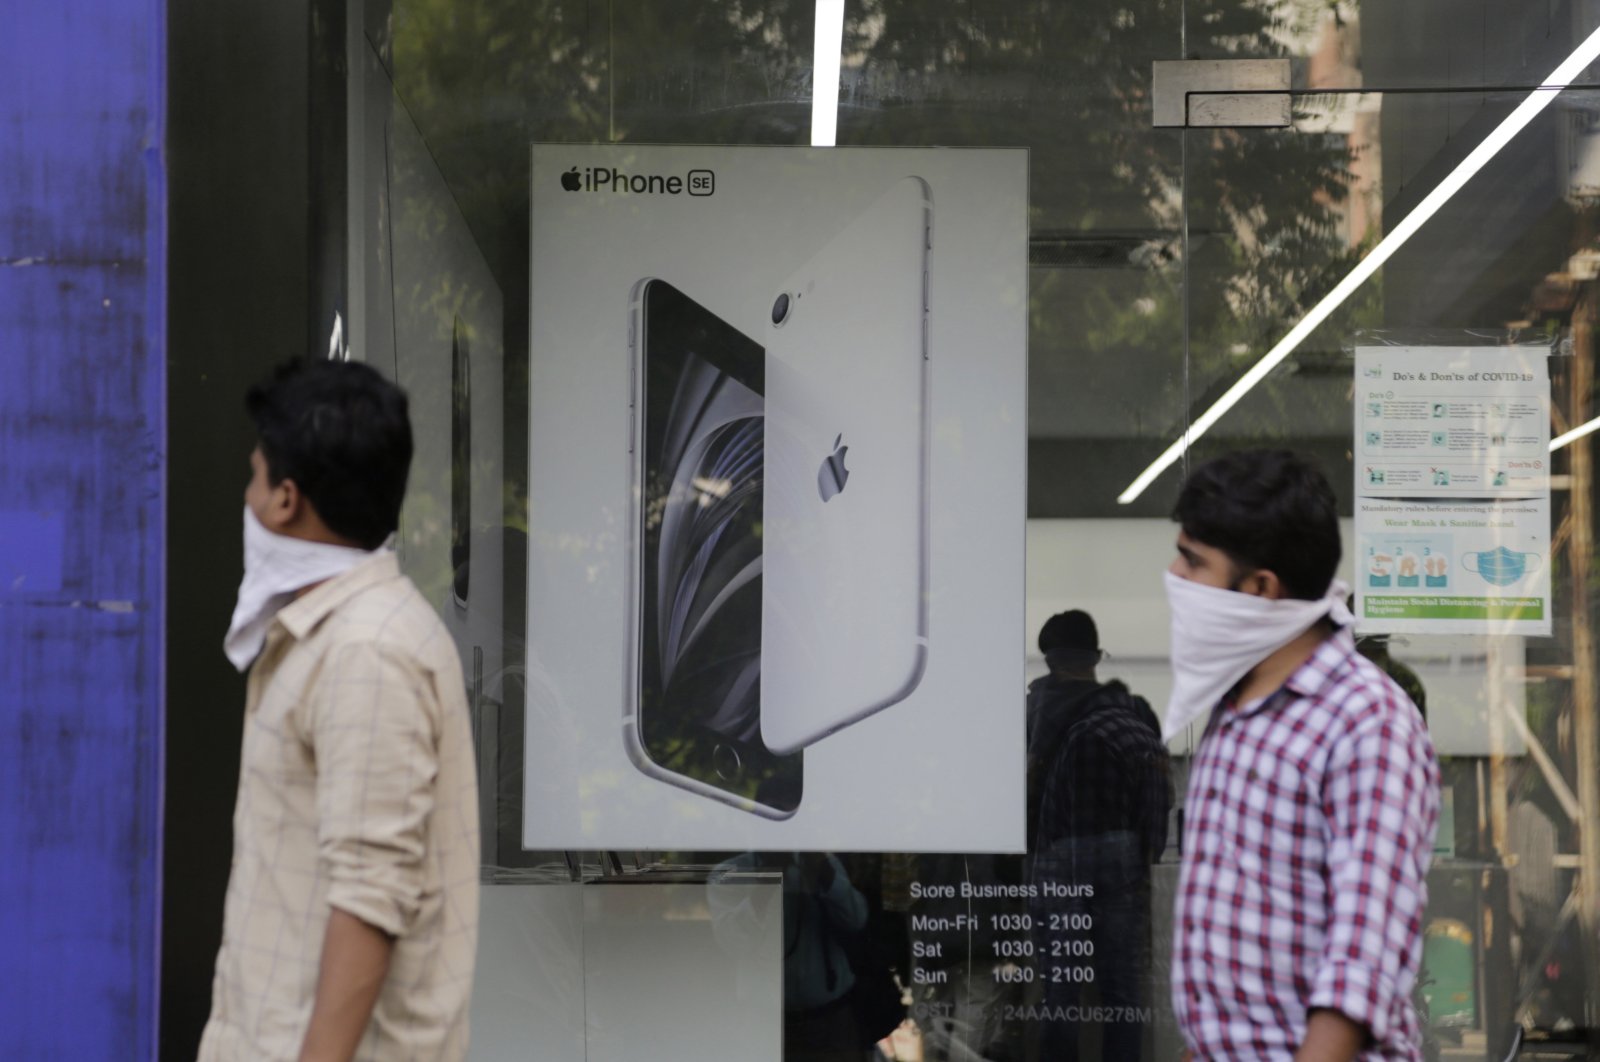 People walk past an image of an iPhone displayed at an Apple store in Ahmedabad, India, Saturday, Aug. 1, 2020. (AP Photo)